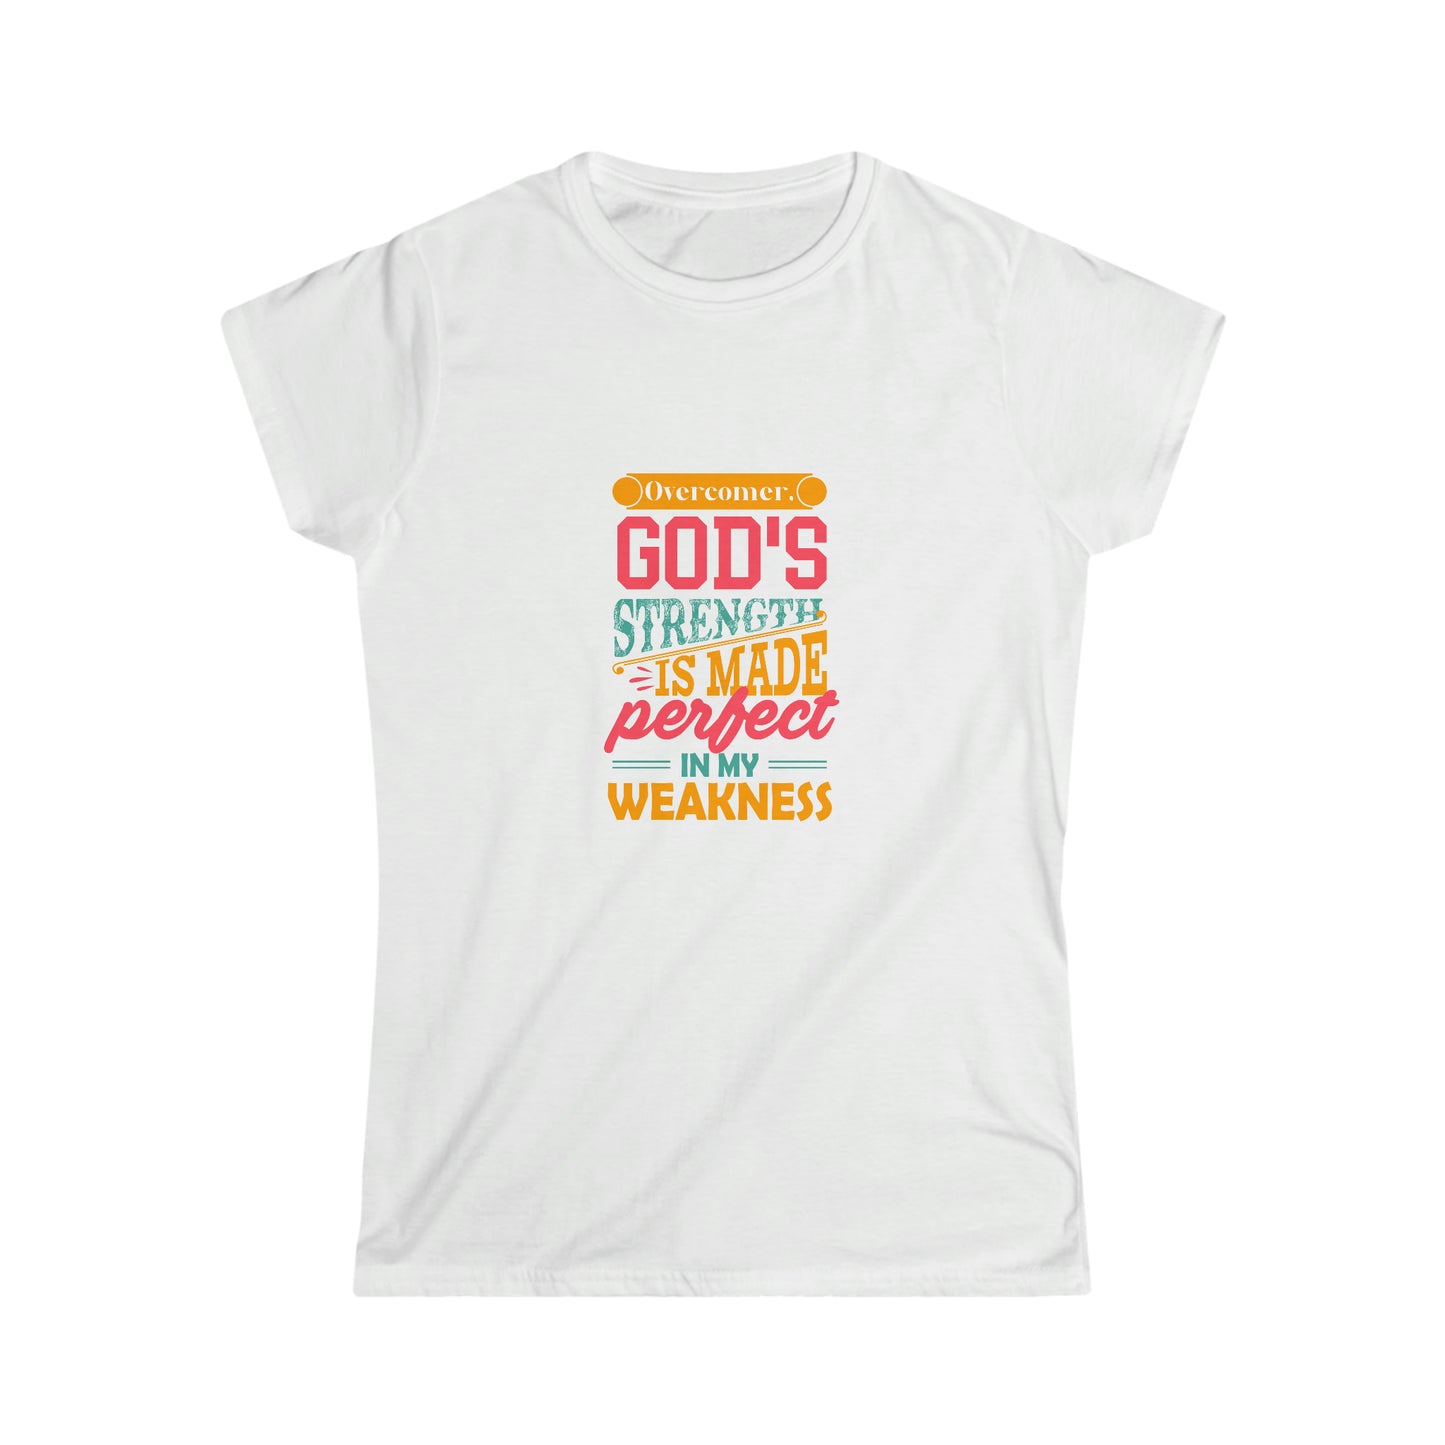 Overcomer, God's Strength Is Made Perfect In My Weakness  Women's T-shirt